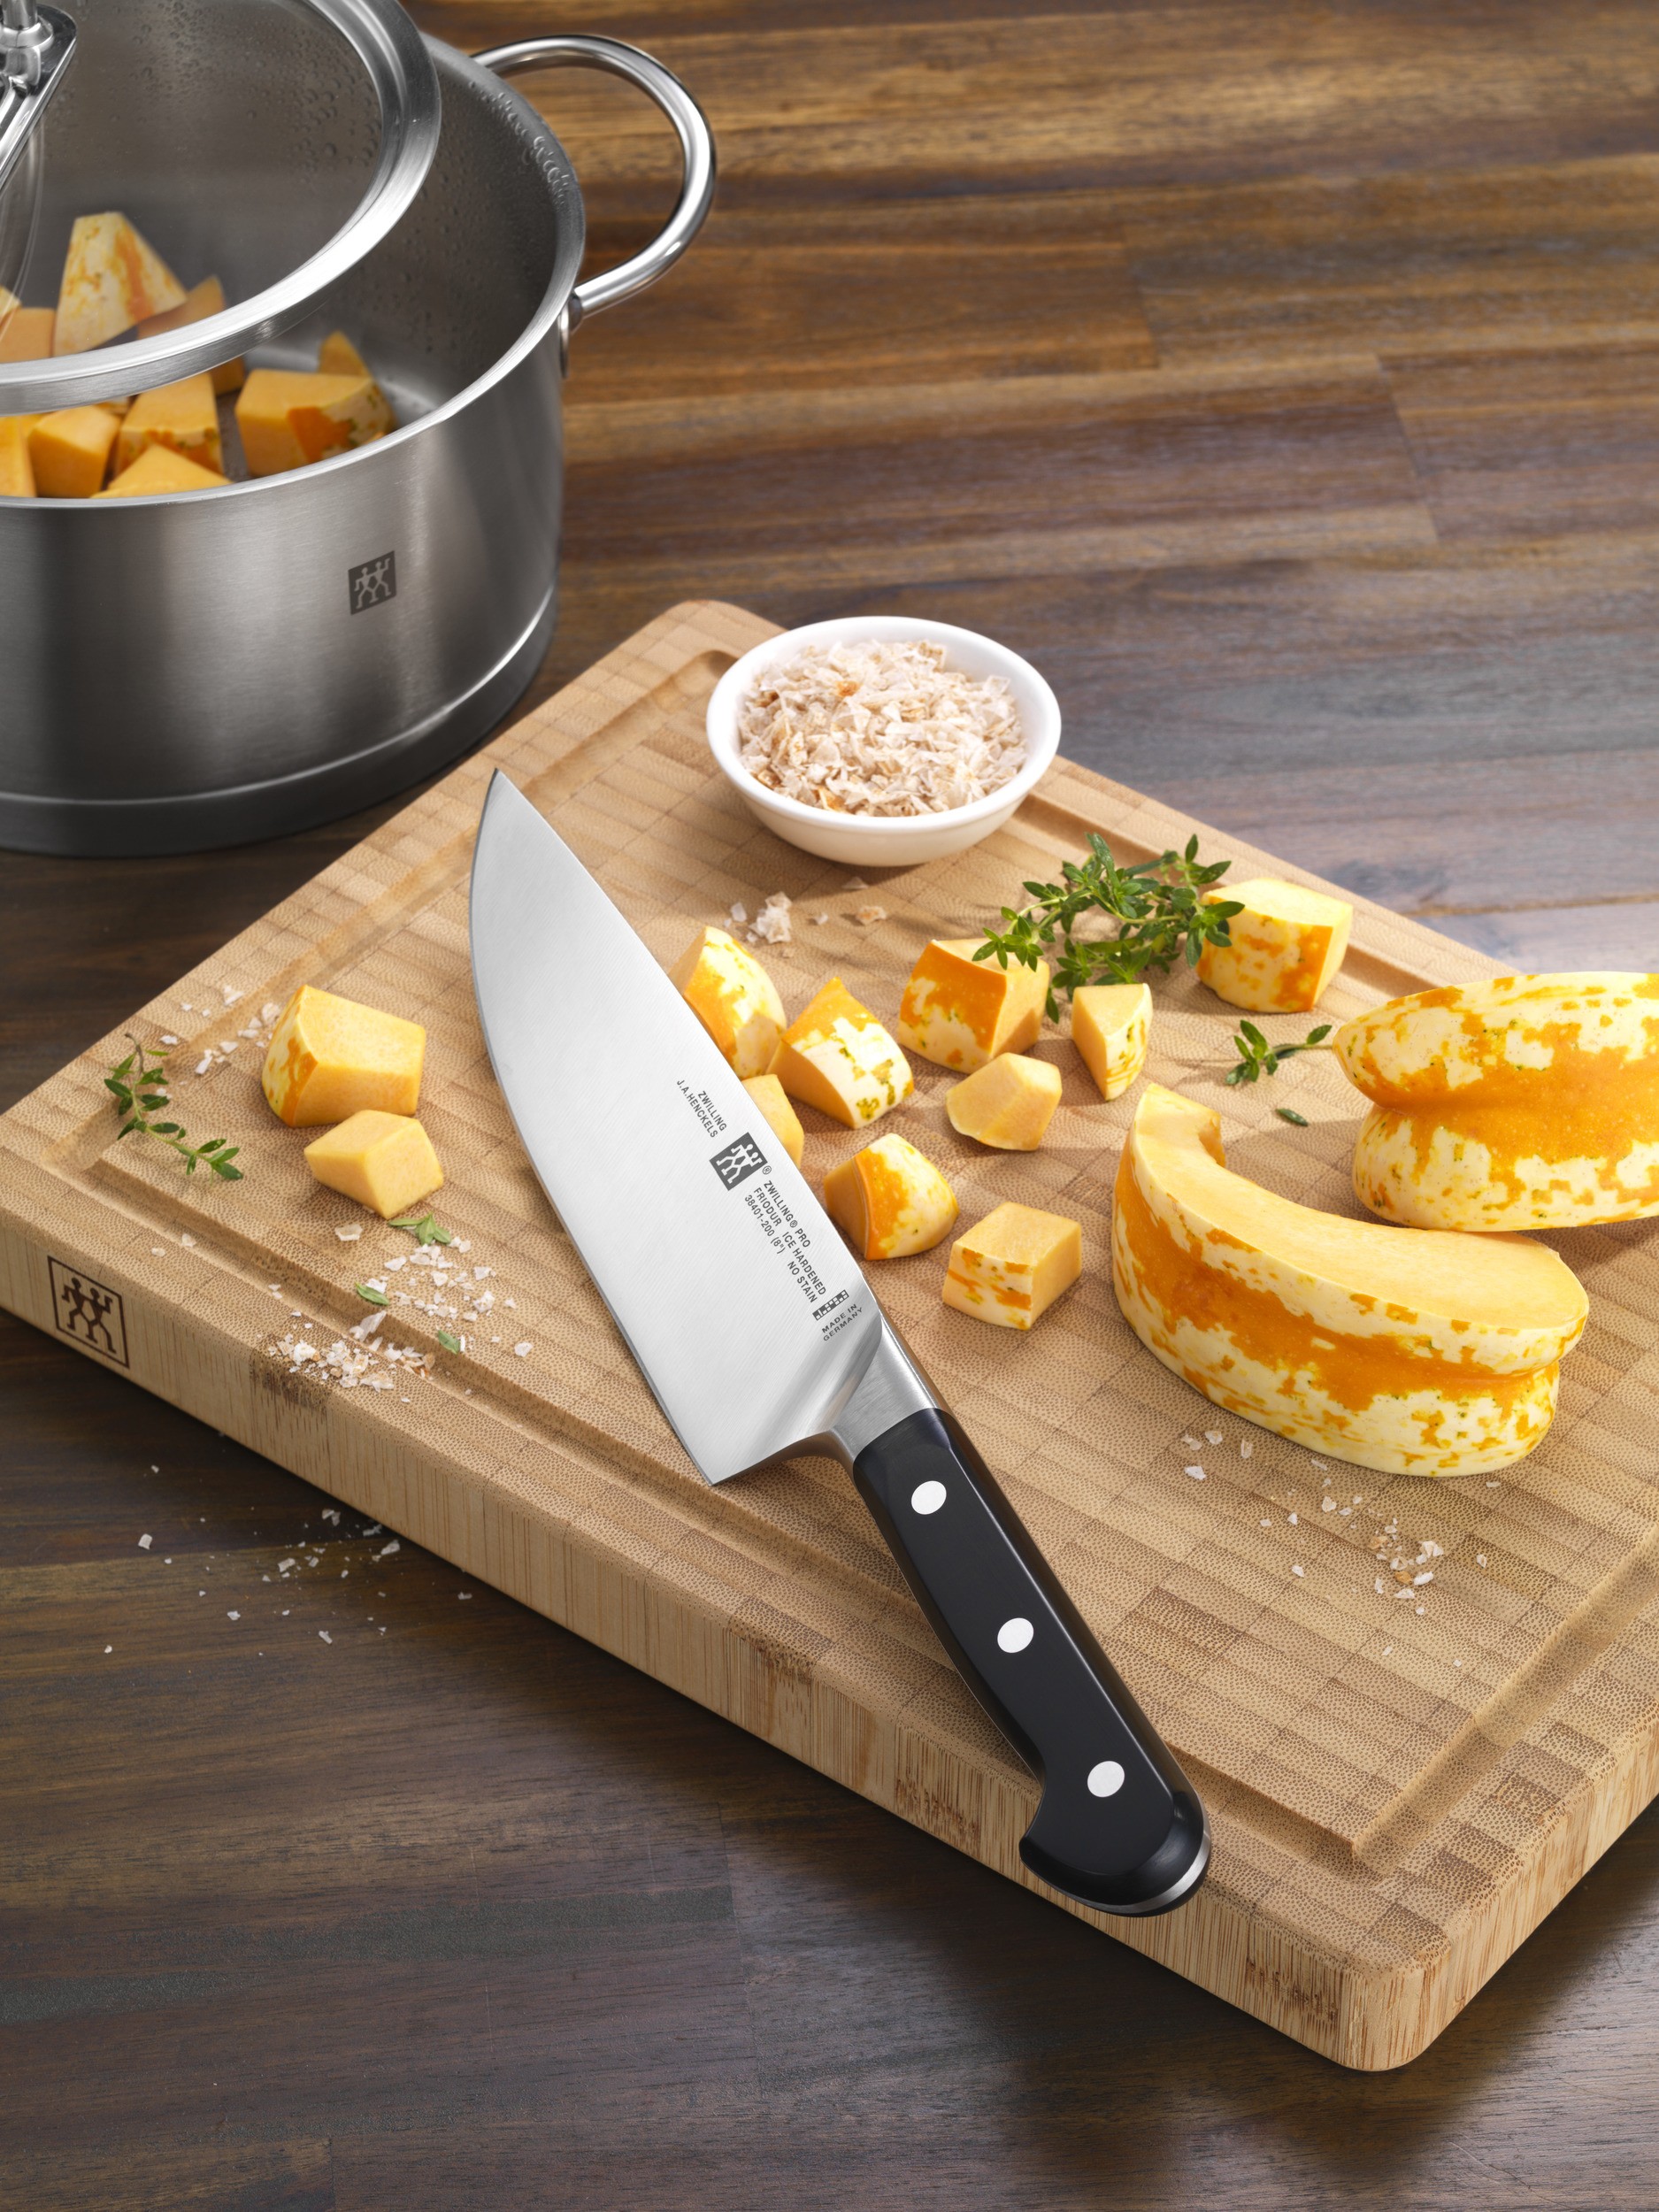 https://3fa-media.com/zwilling/zwilling-zwilling-pro-chef-s-knife-charcuterie-knife-and-paring-knife-3-el__107783_25c1ddc-s2500x2500.jpg